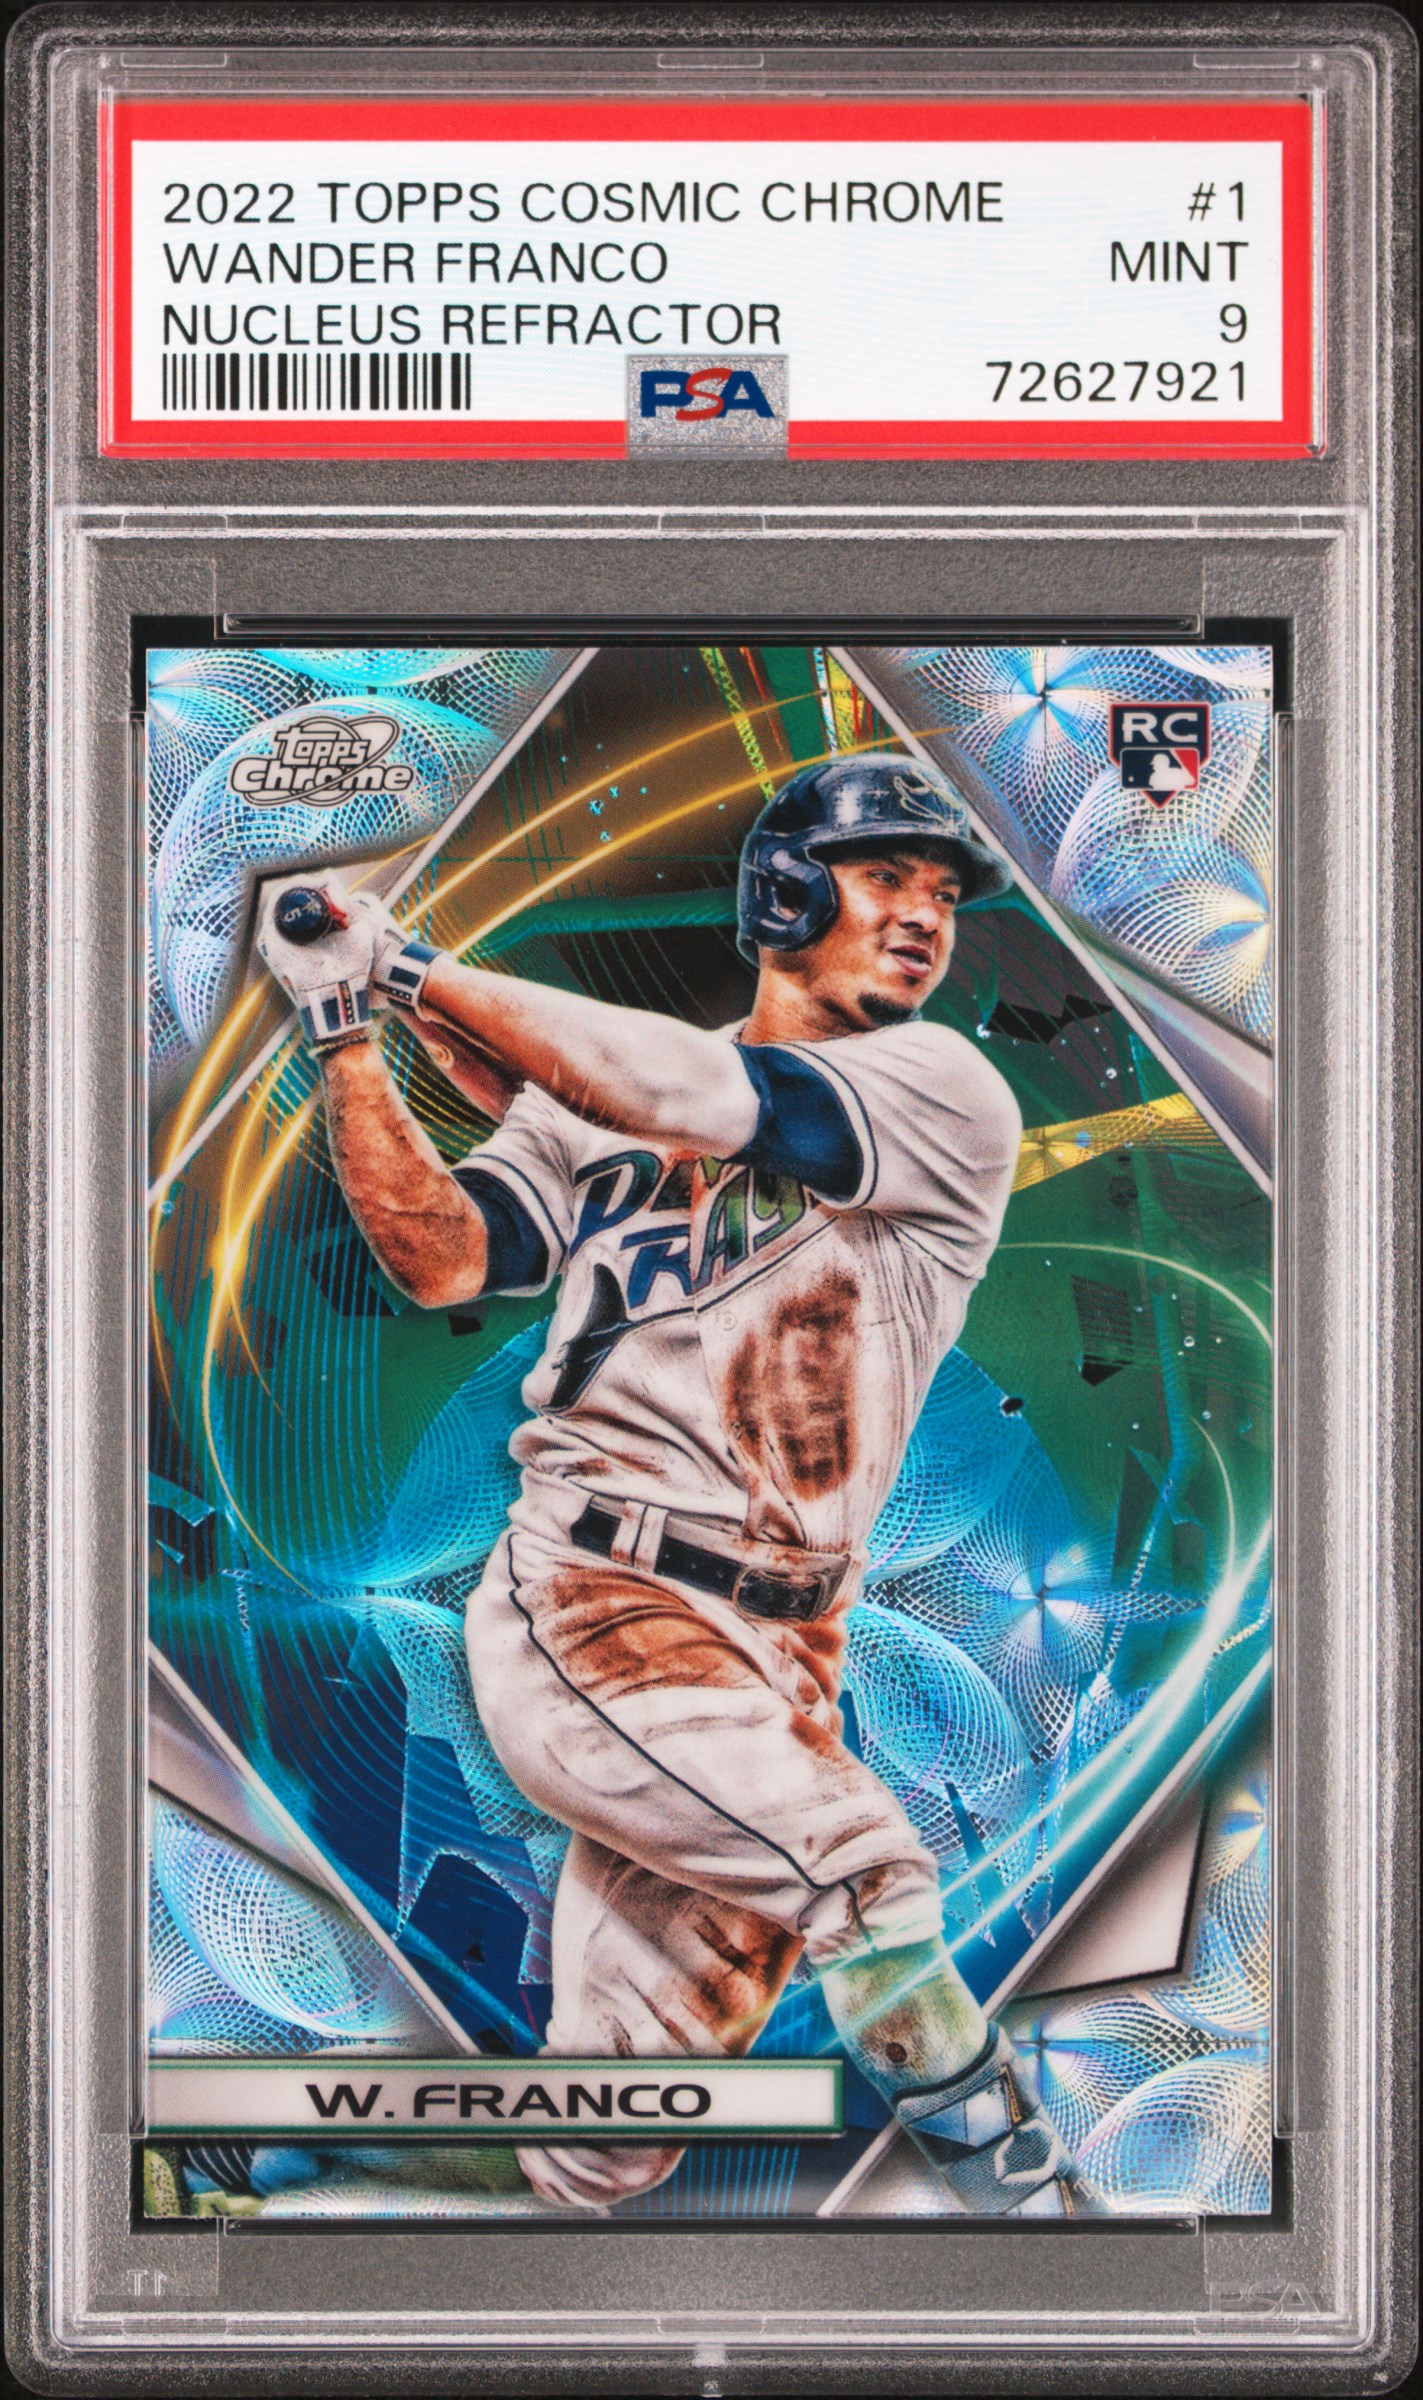 2022 Topps Cosmic Chrome Nucleus Refractor #1 Wander Franco Rookie Card – PSA MINT 9